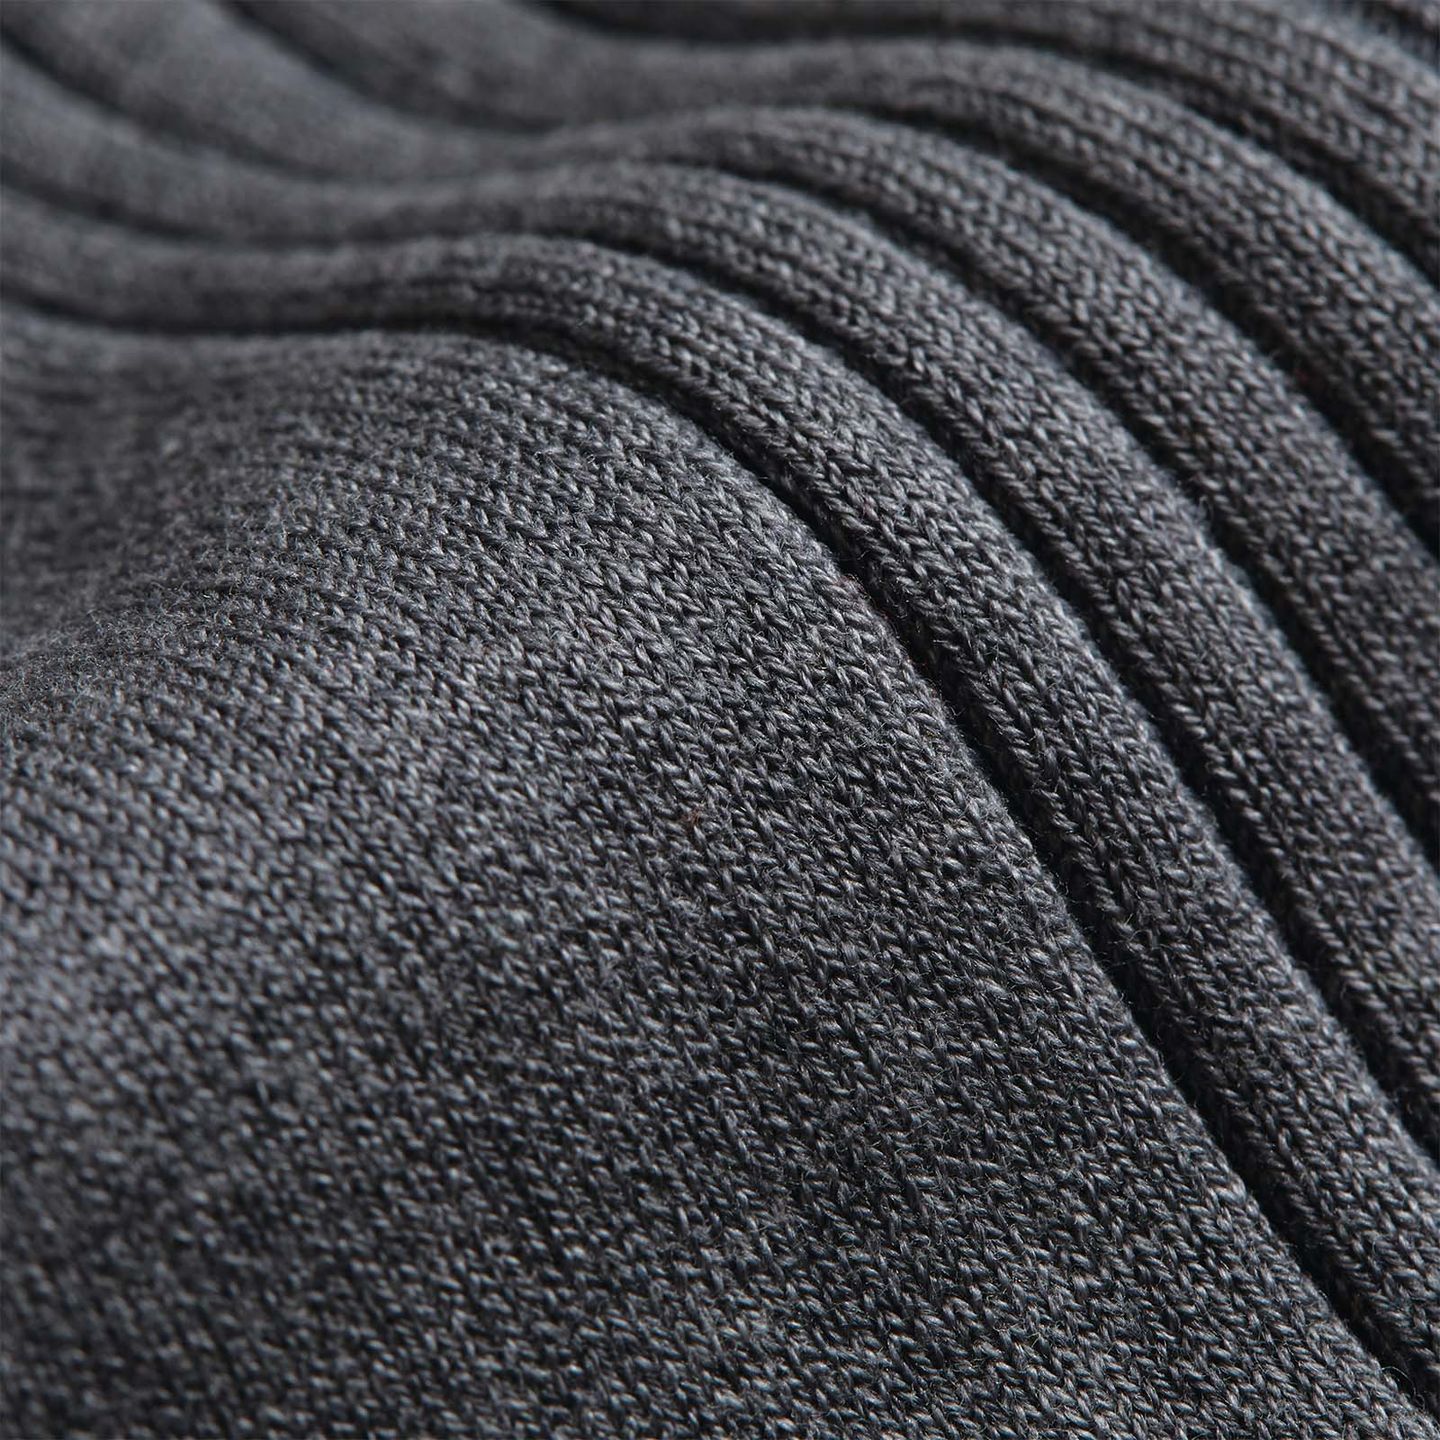 A close up of an earl grey sock